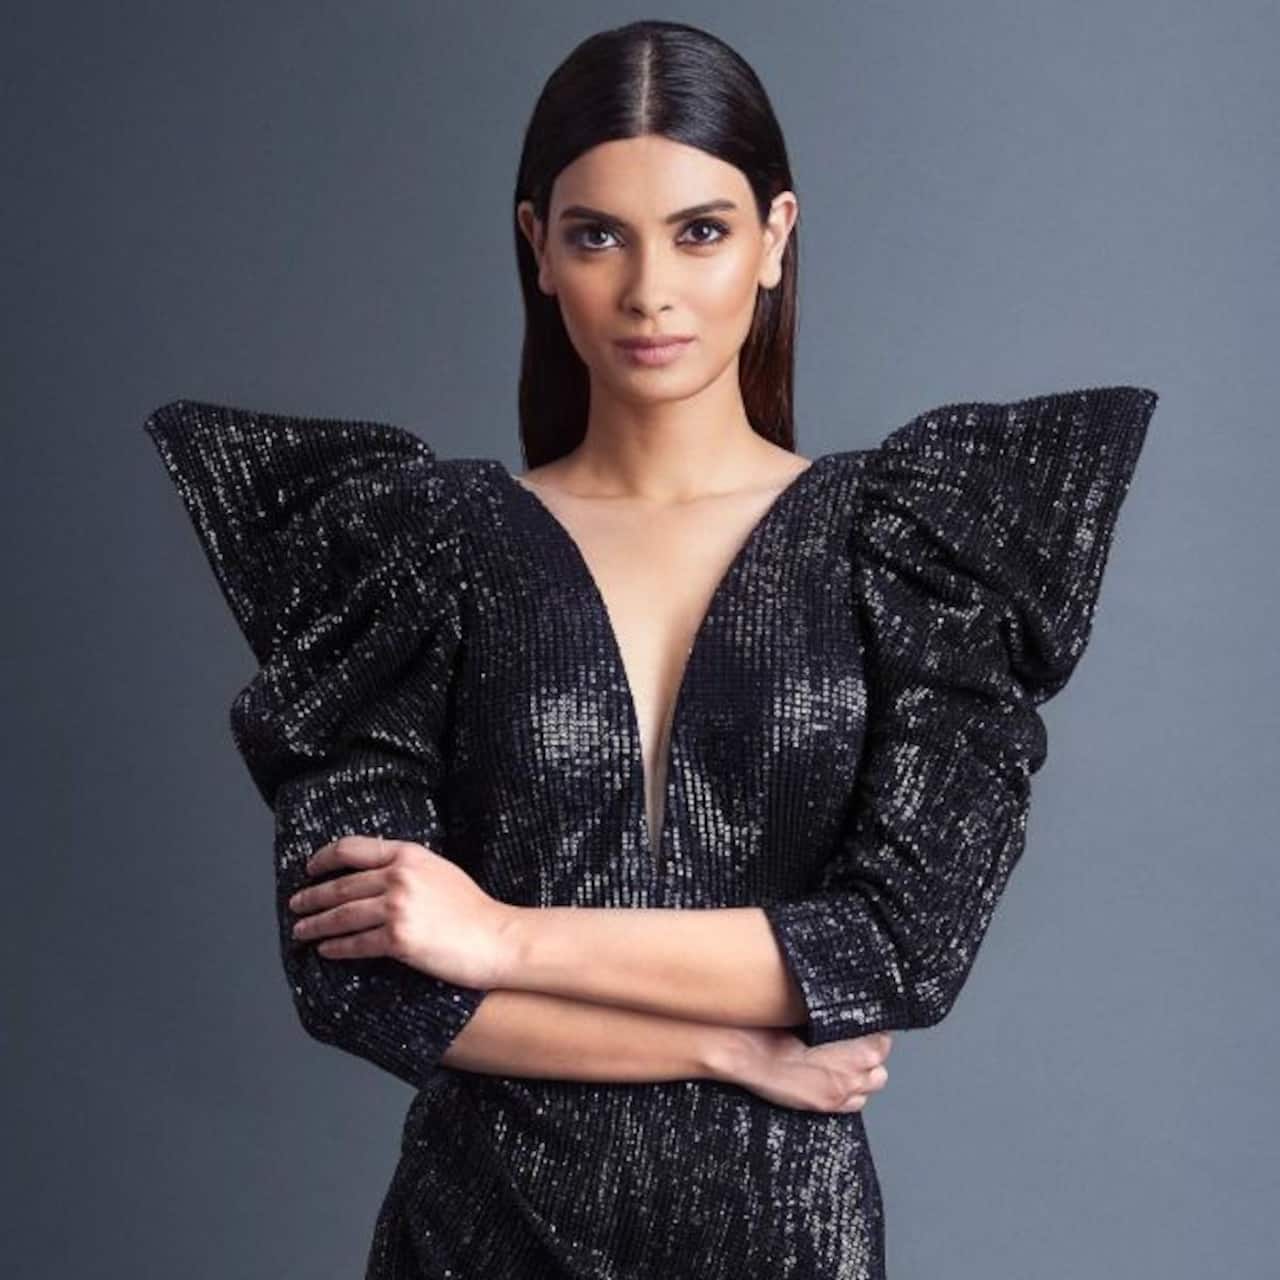 Cannes Film Festival 2019: Diana Penty excited to walk the red carpet